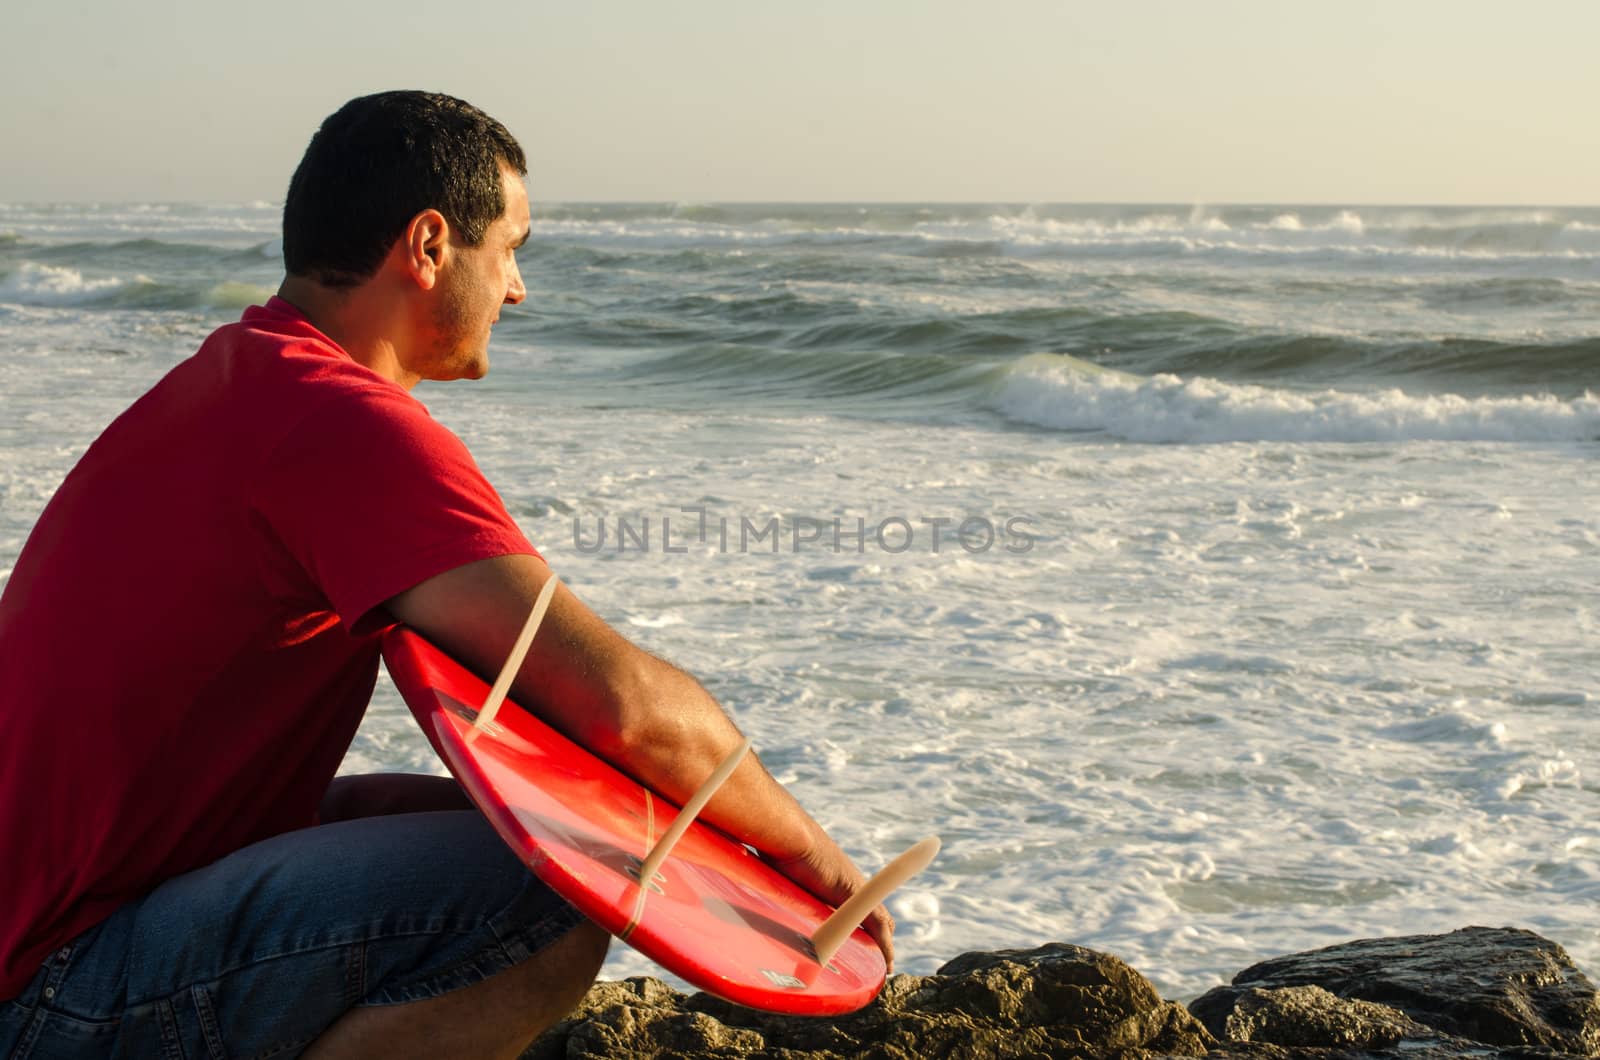 A surfer watching the waves sitting down with his arms around his surfboard.